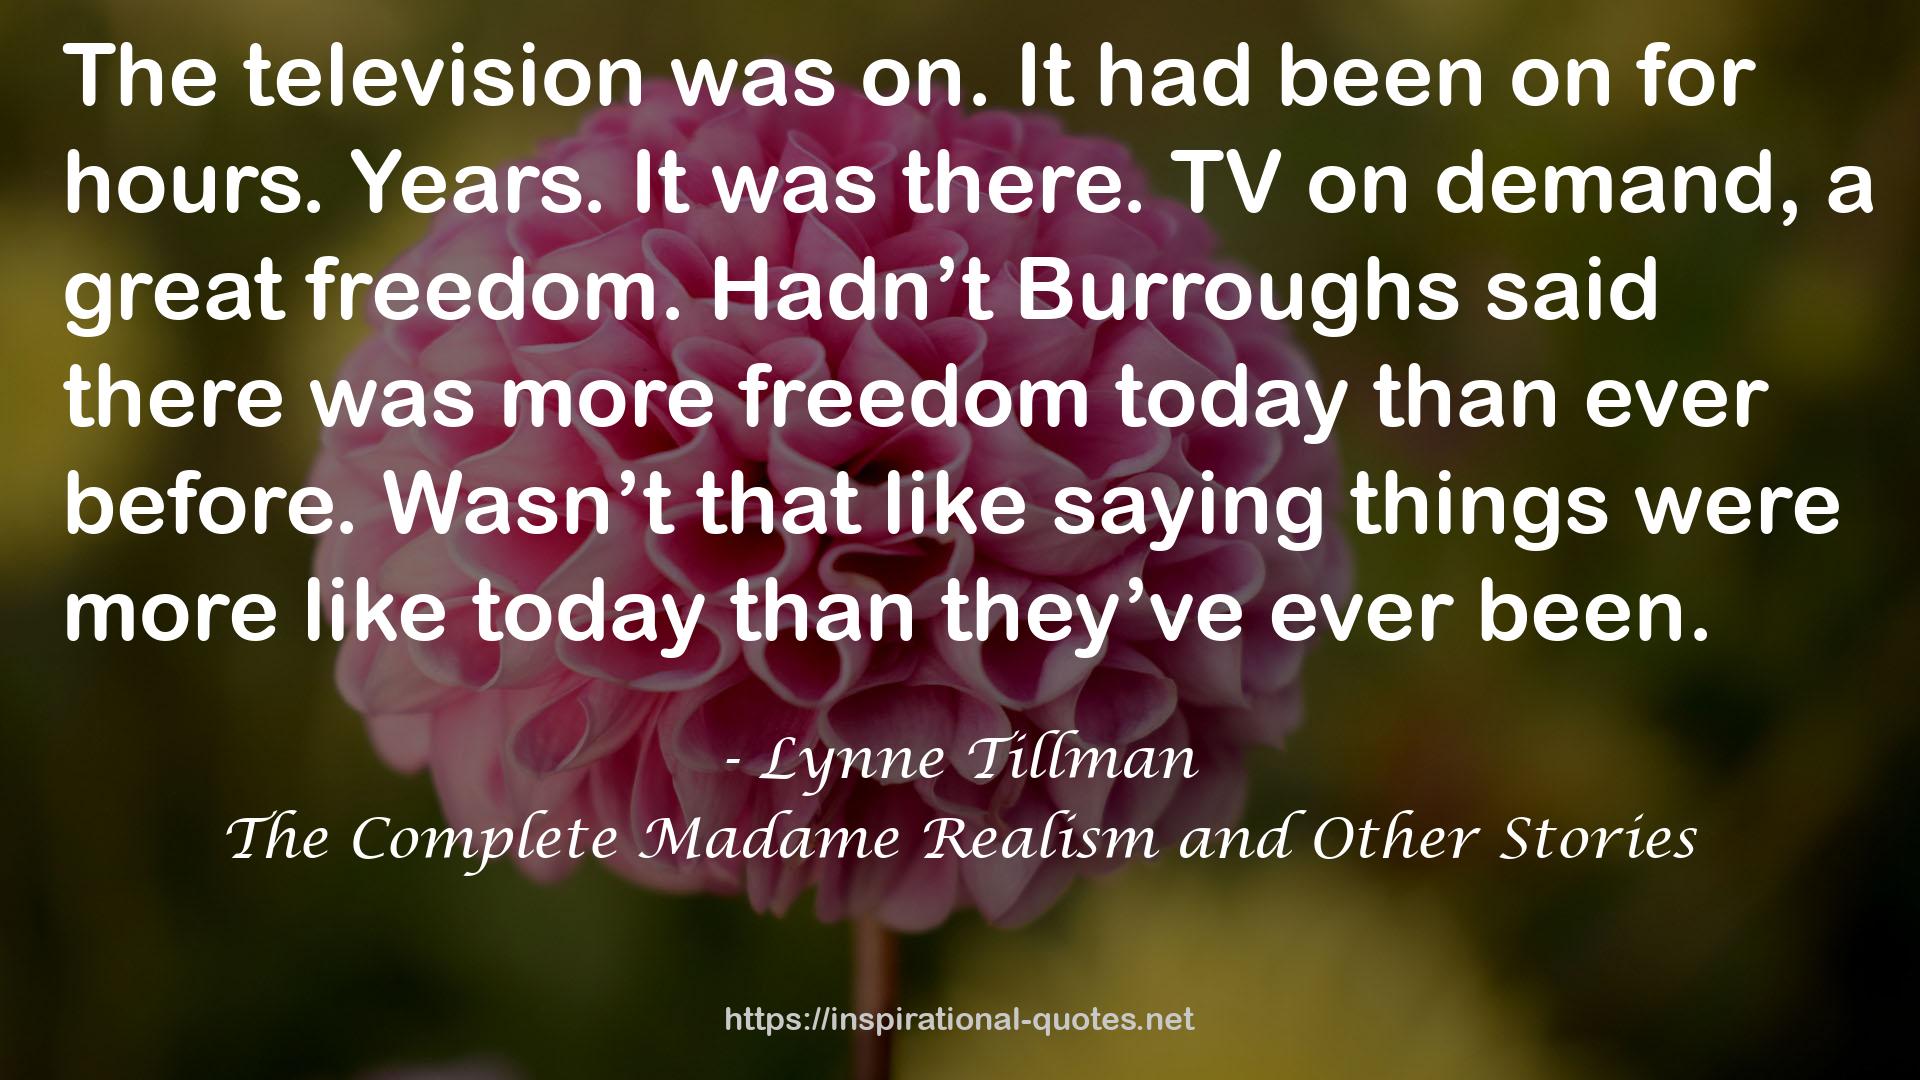 The Complete Madame Realism and Other Stories QUOTES